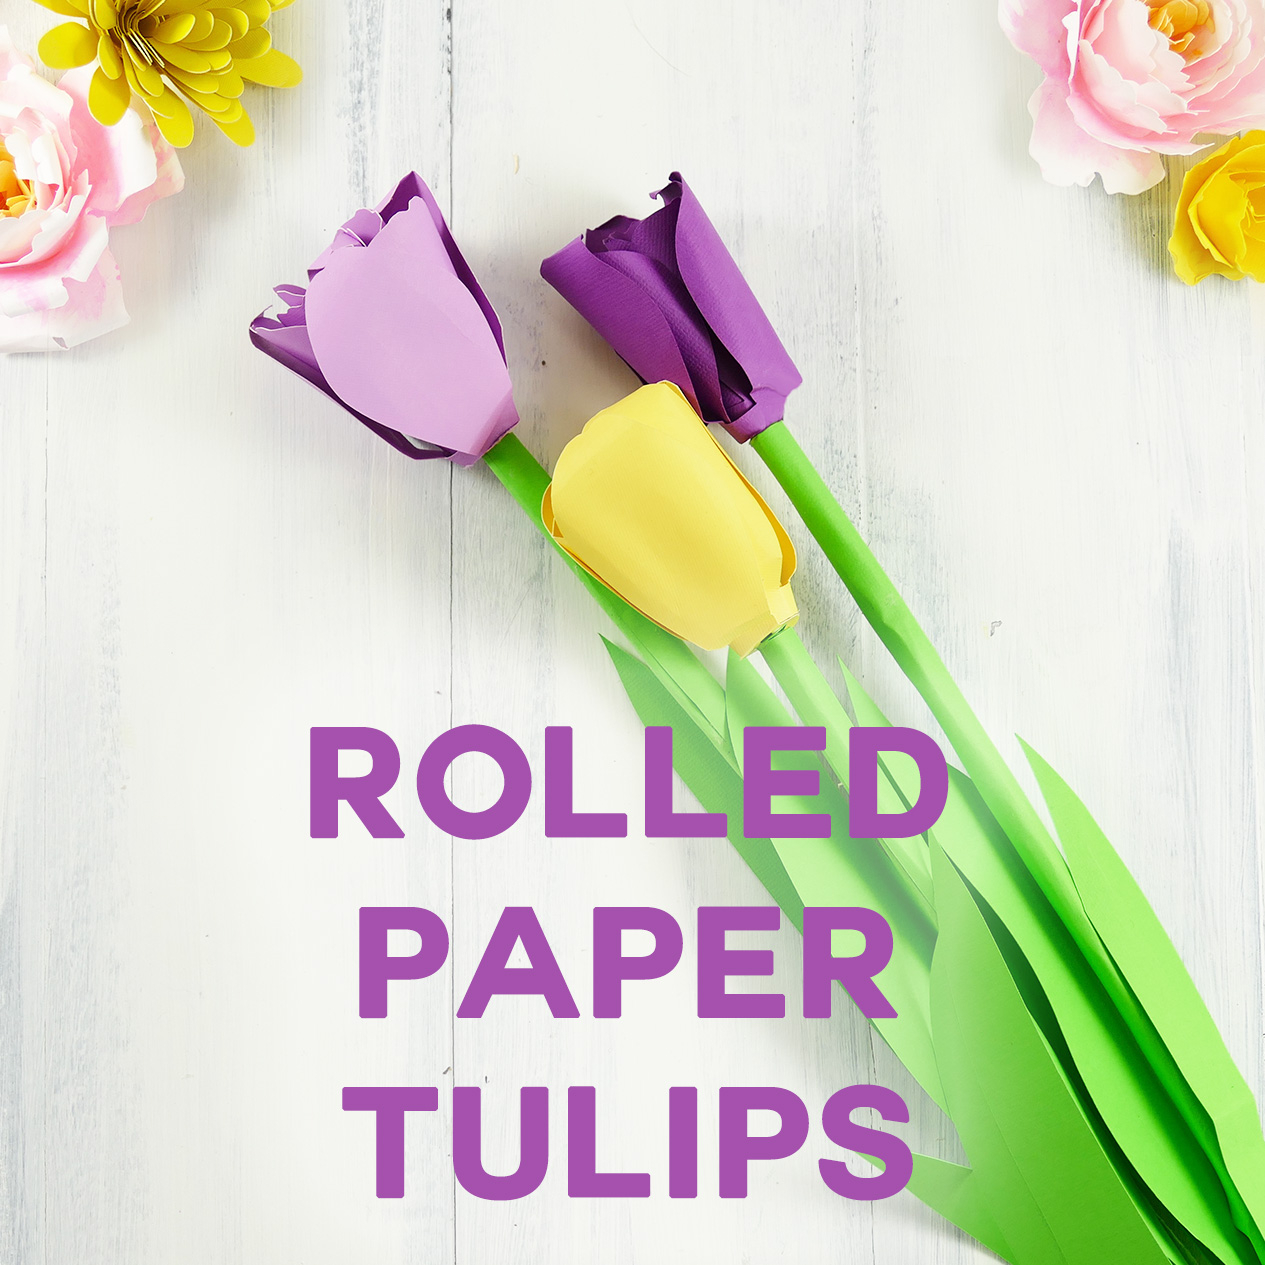 How To Make An Origami Tulip Make A Paper Tulip Bring Spring To Your Home Jennifer Maker